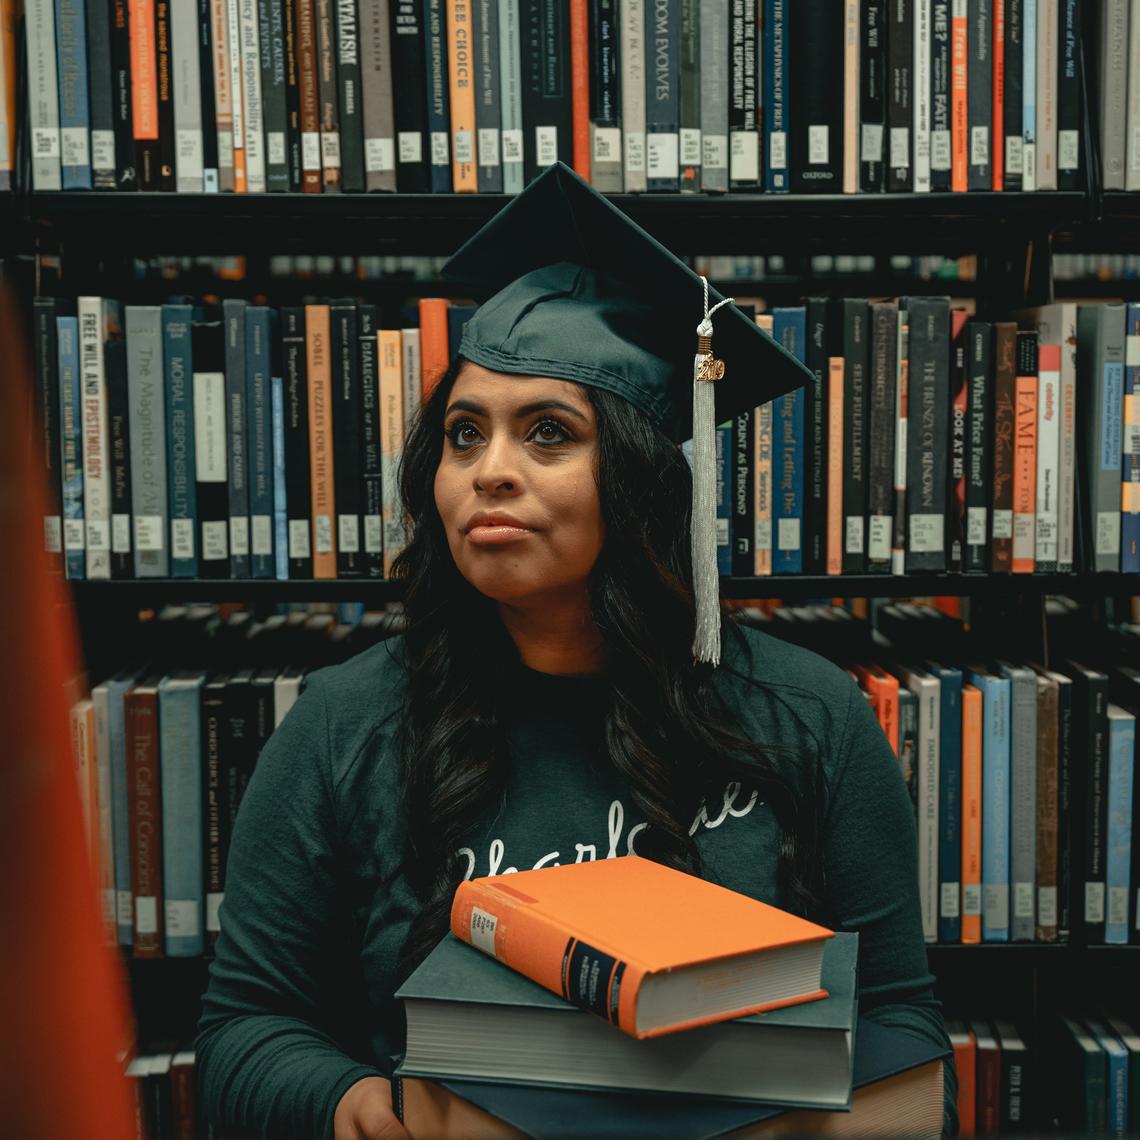 Young black student wearing graduation cap in library carrying books